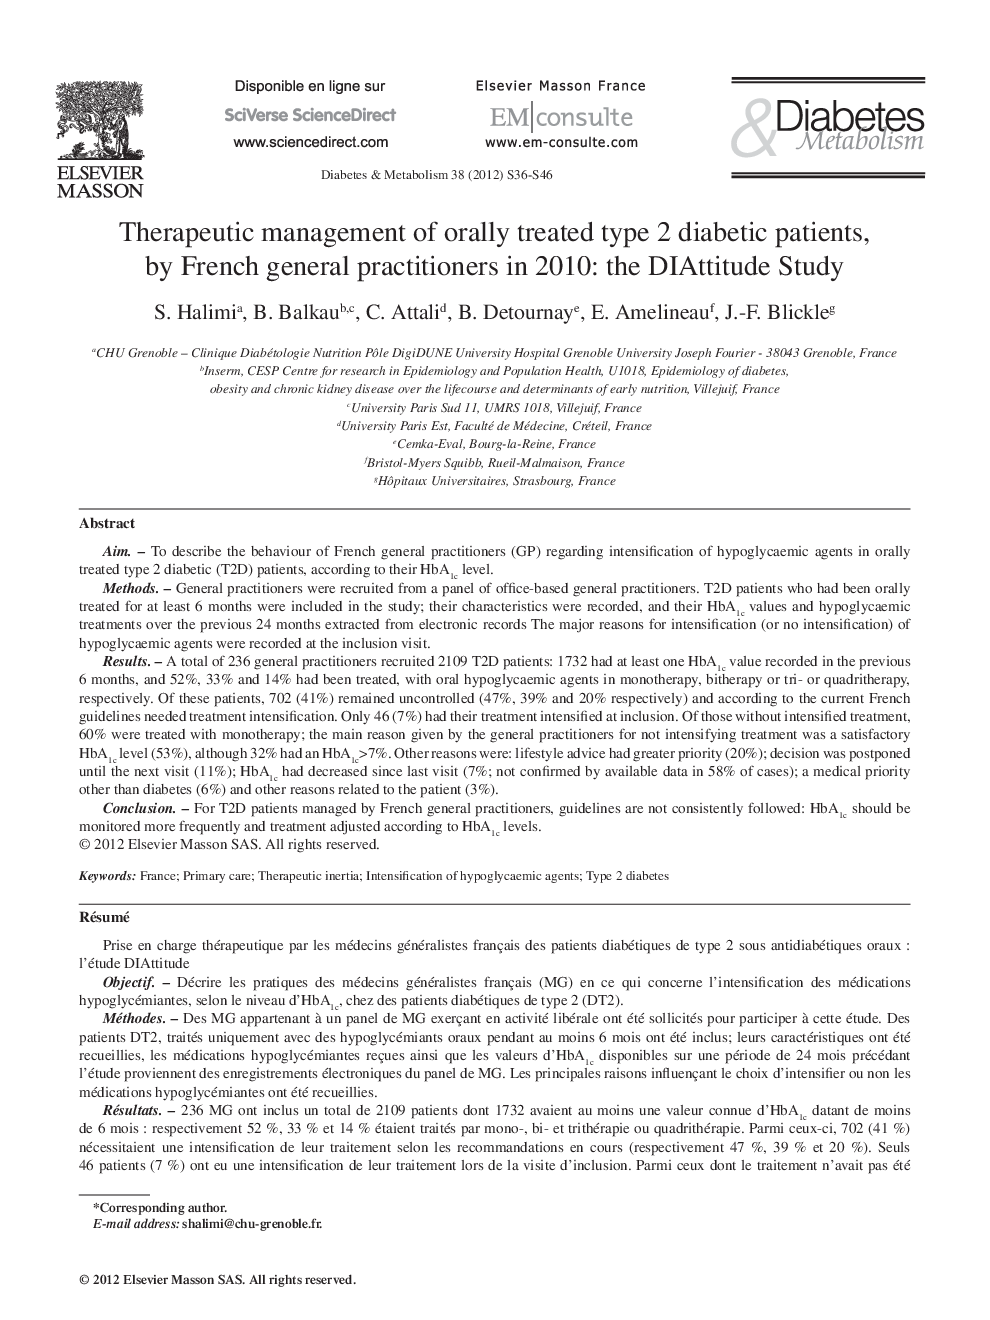 Therapeutic management of orally treated type 2 diabetic patients, by French general practitioners in 2010: the DIAttitude Study